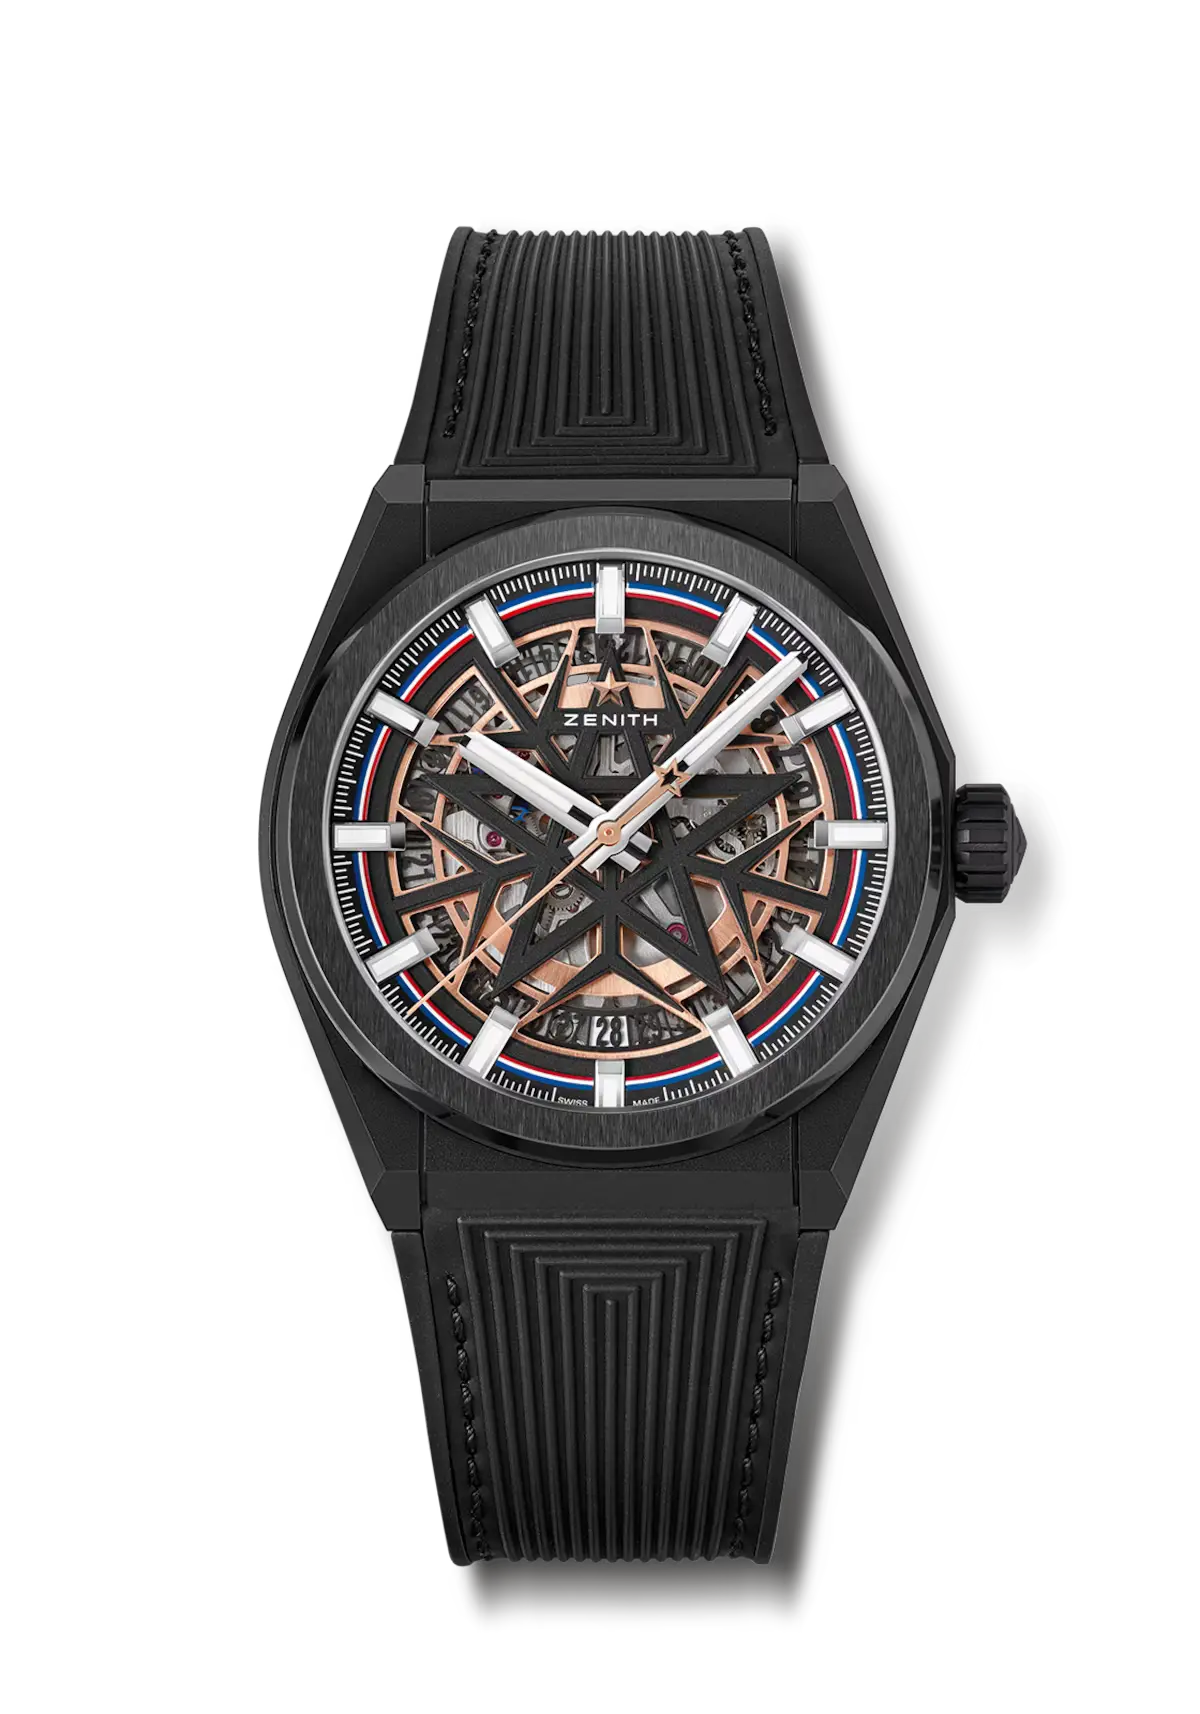 Zenith Defy Classic collection to be discontinued by end of 2022